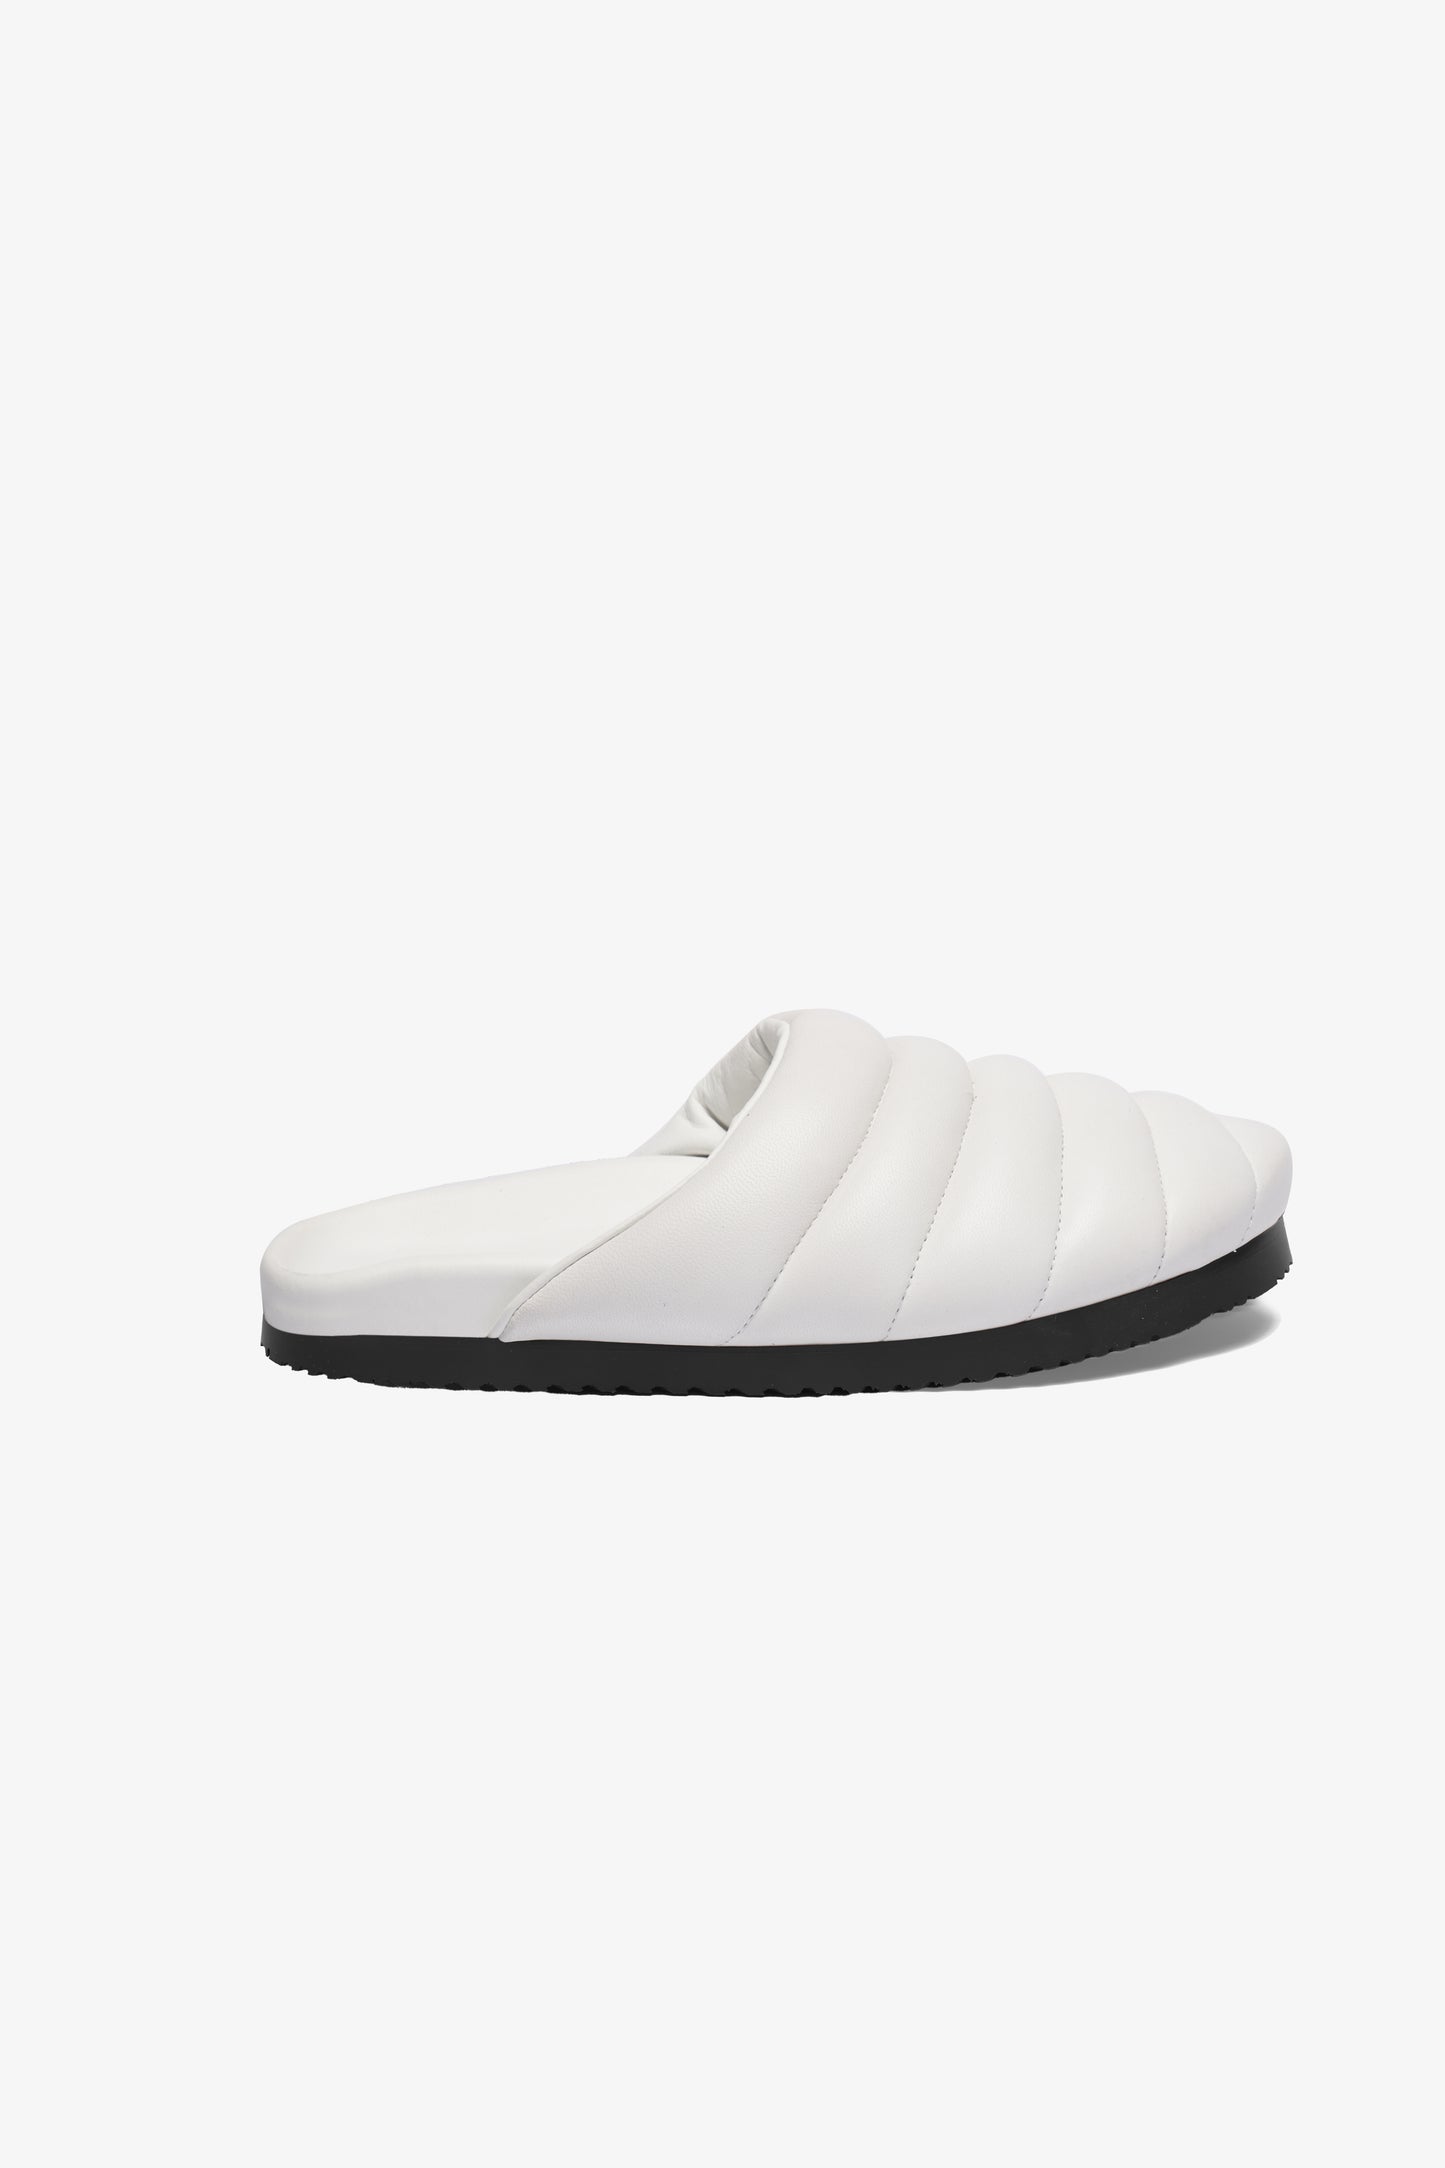 Quincy Padded White Nappa